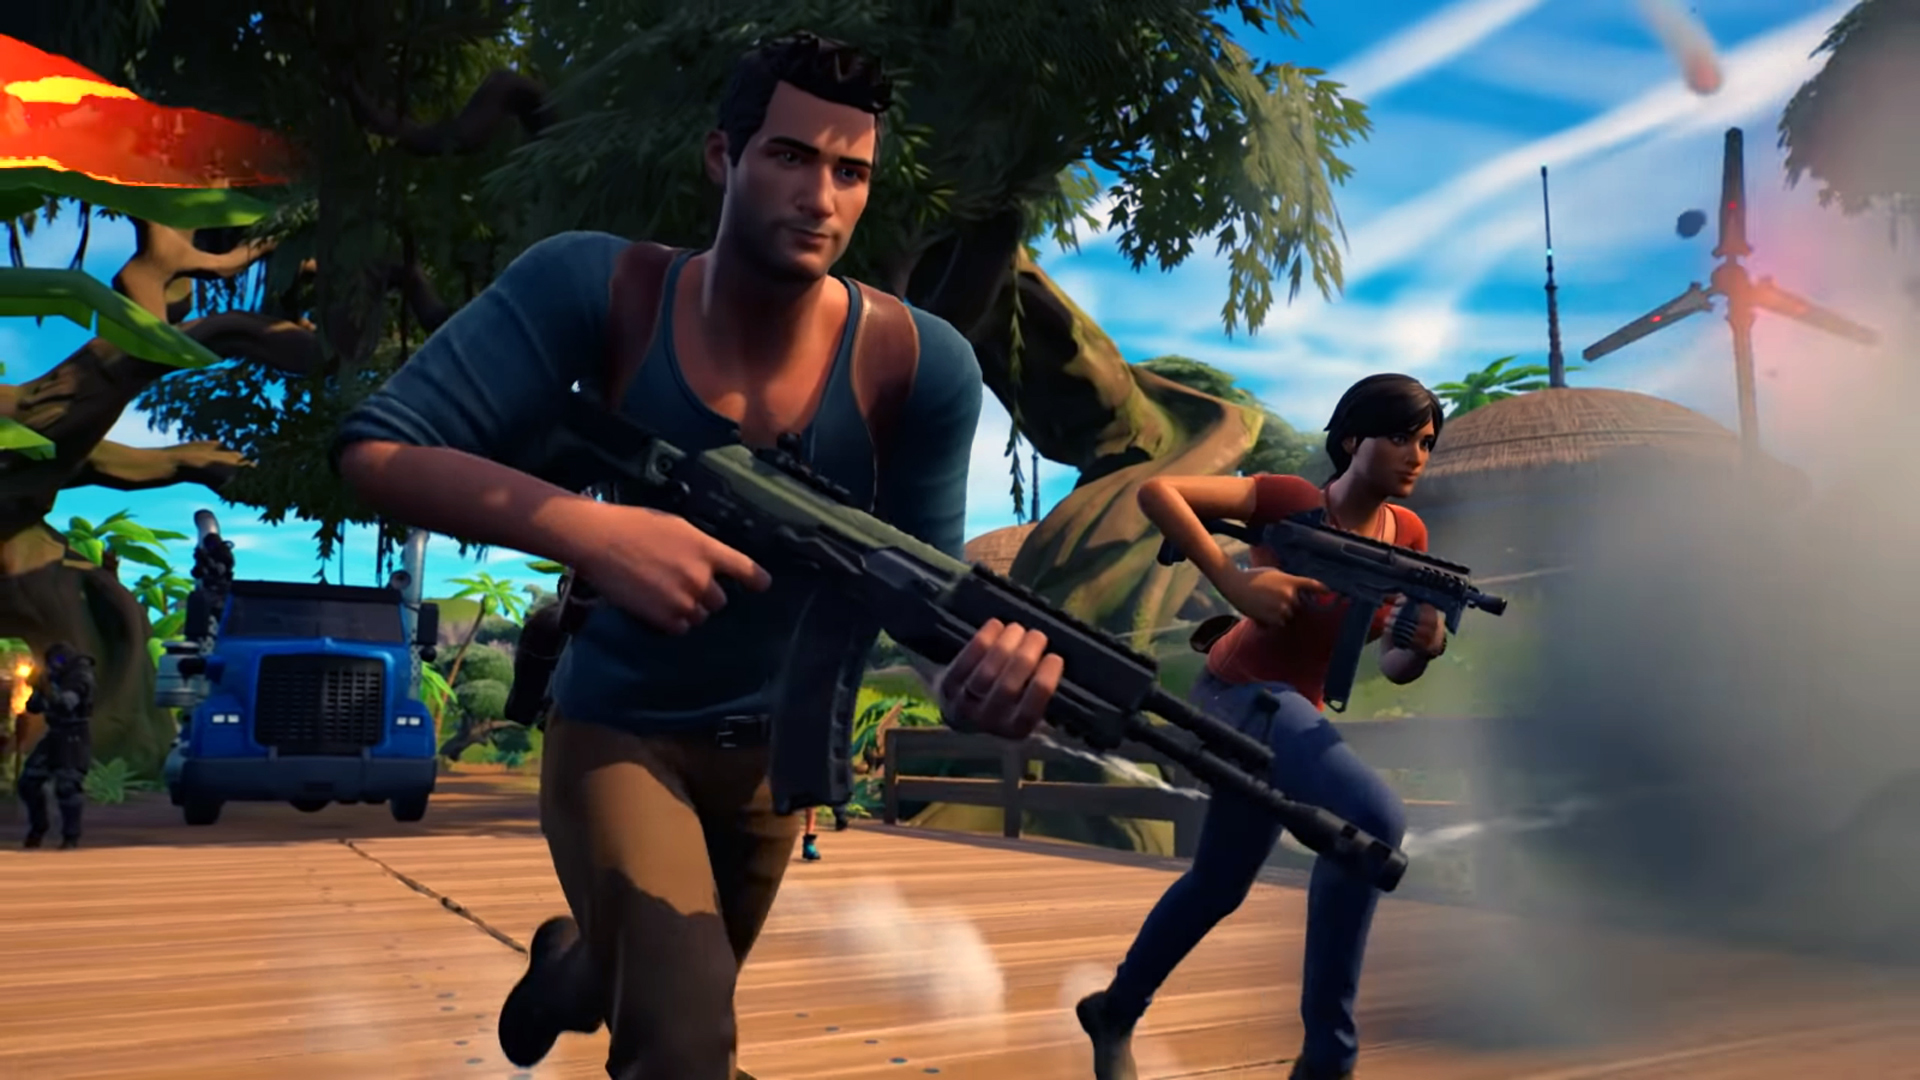 Fortnite x Uncharted skins will include both movie and game versions, phew